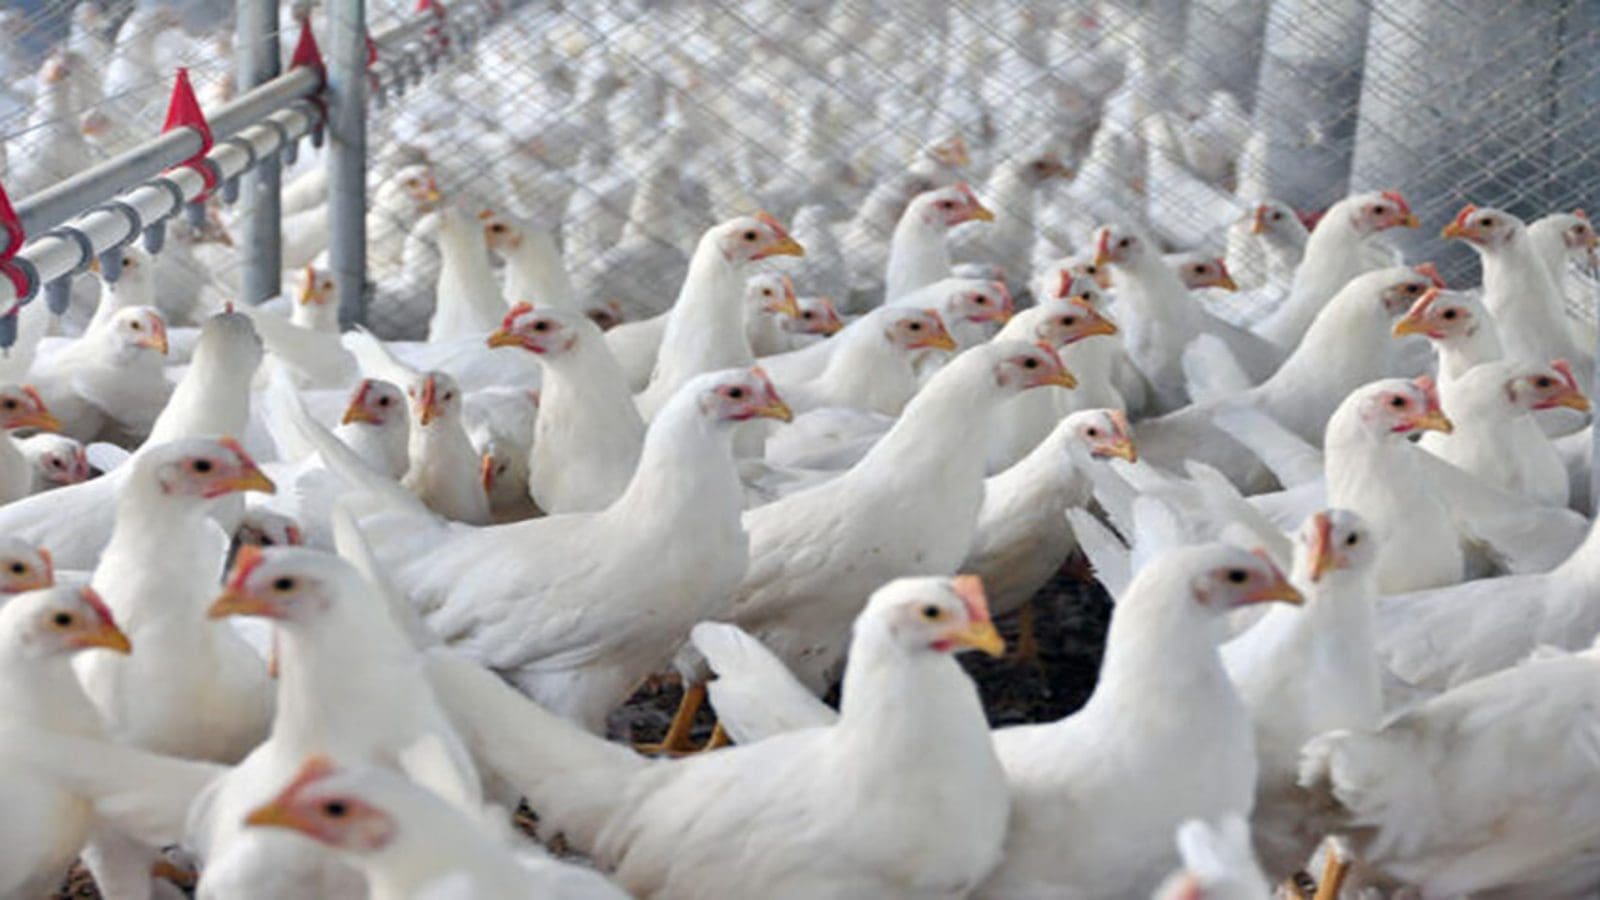 Nigeria’s Plateau State intervenes to cushion farmers from egg glut